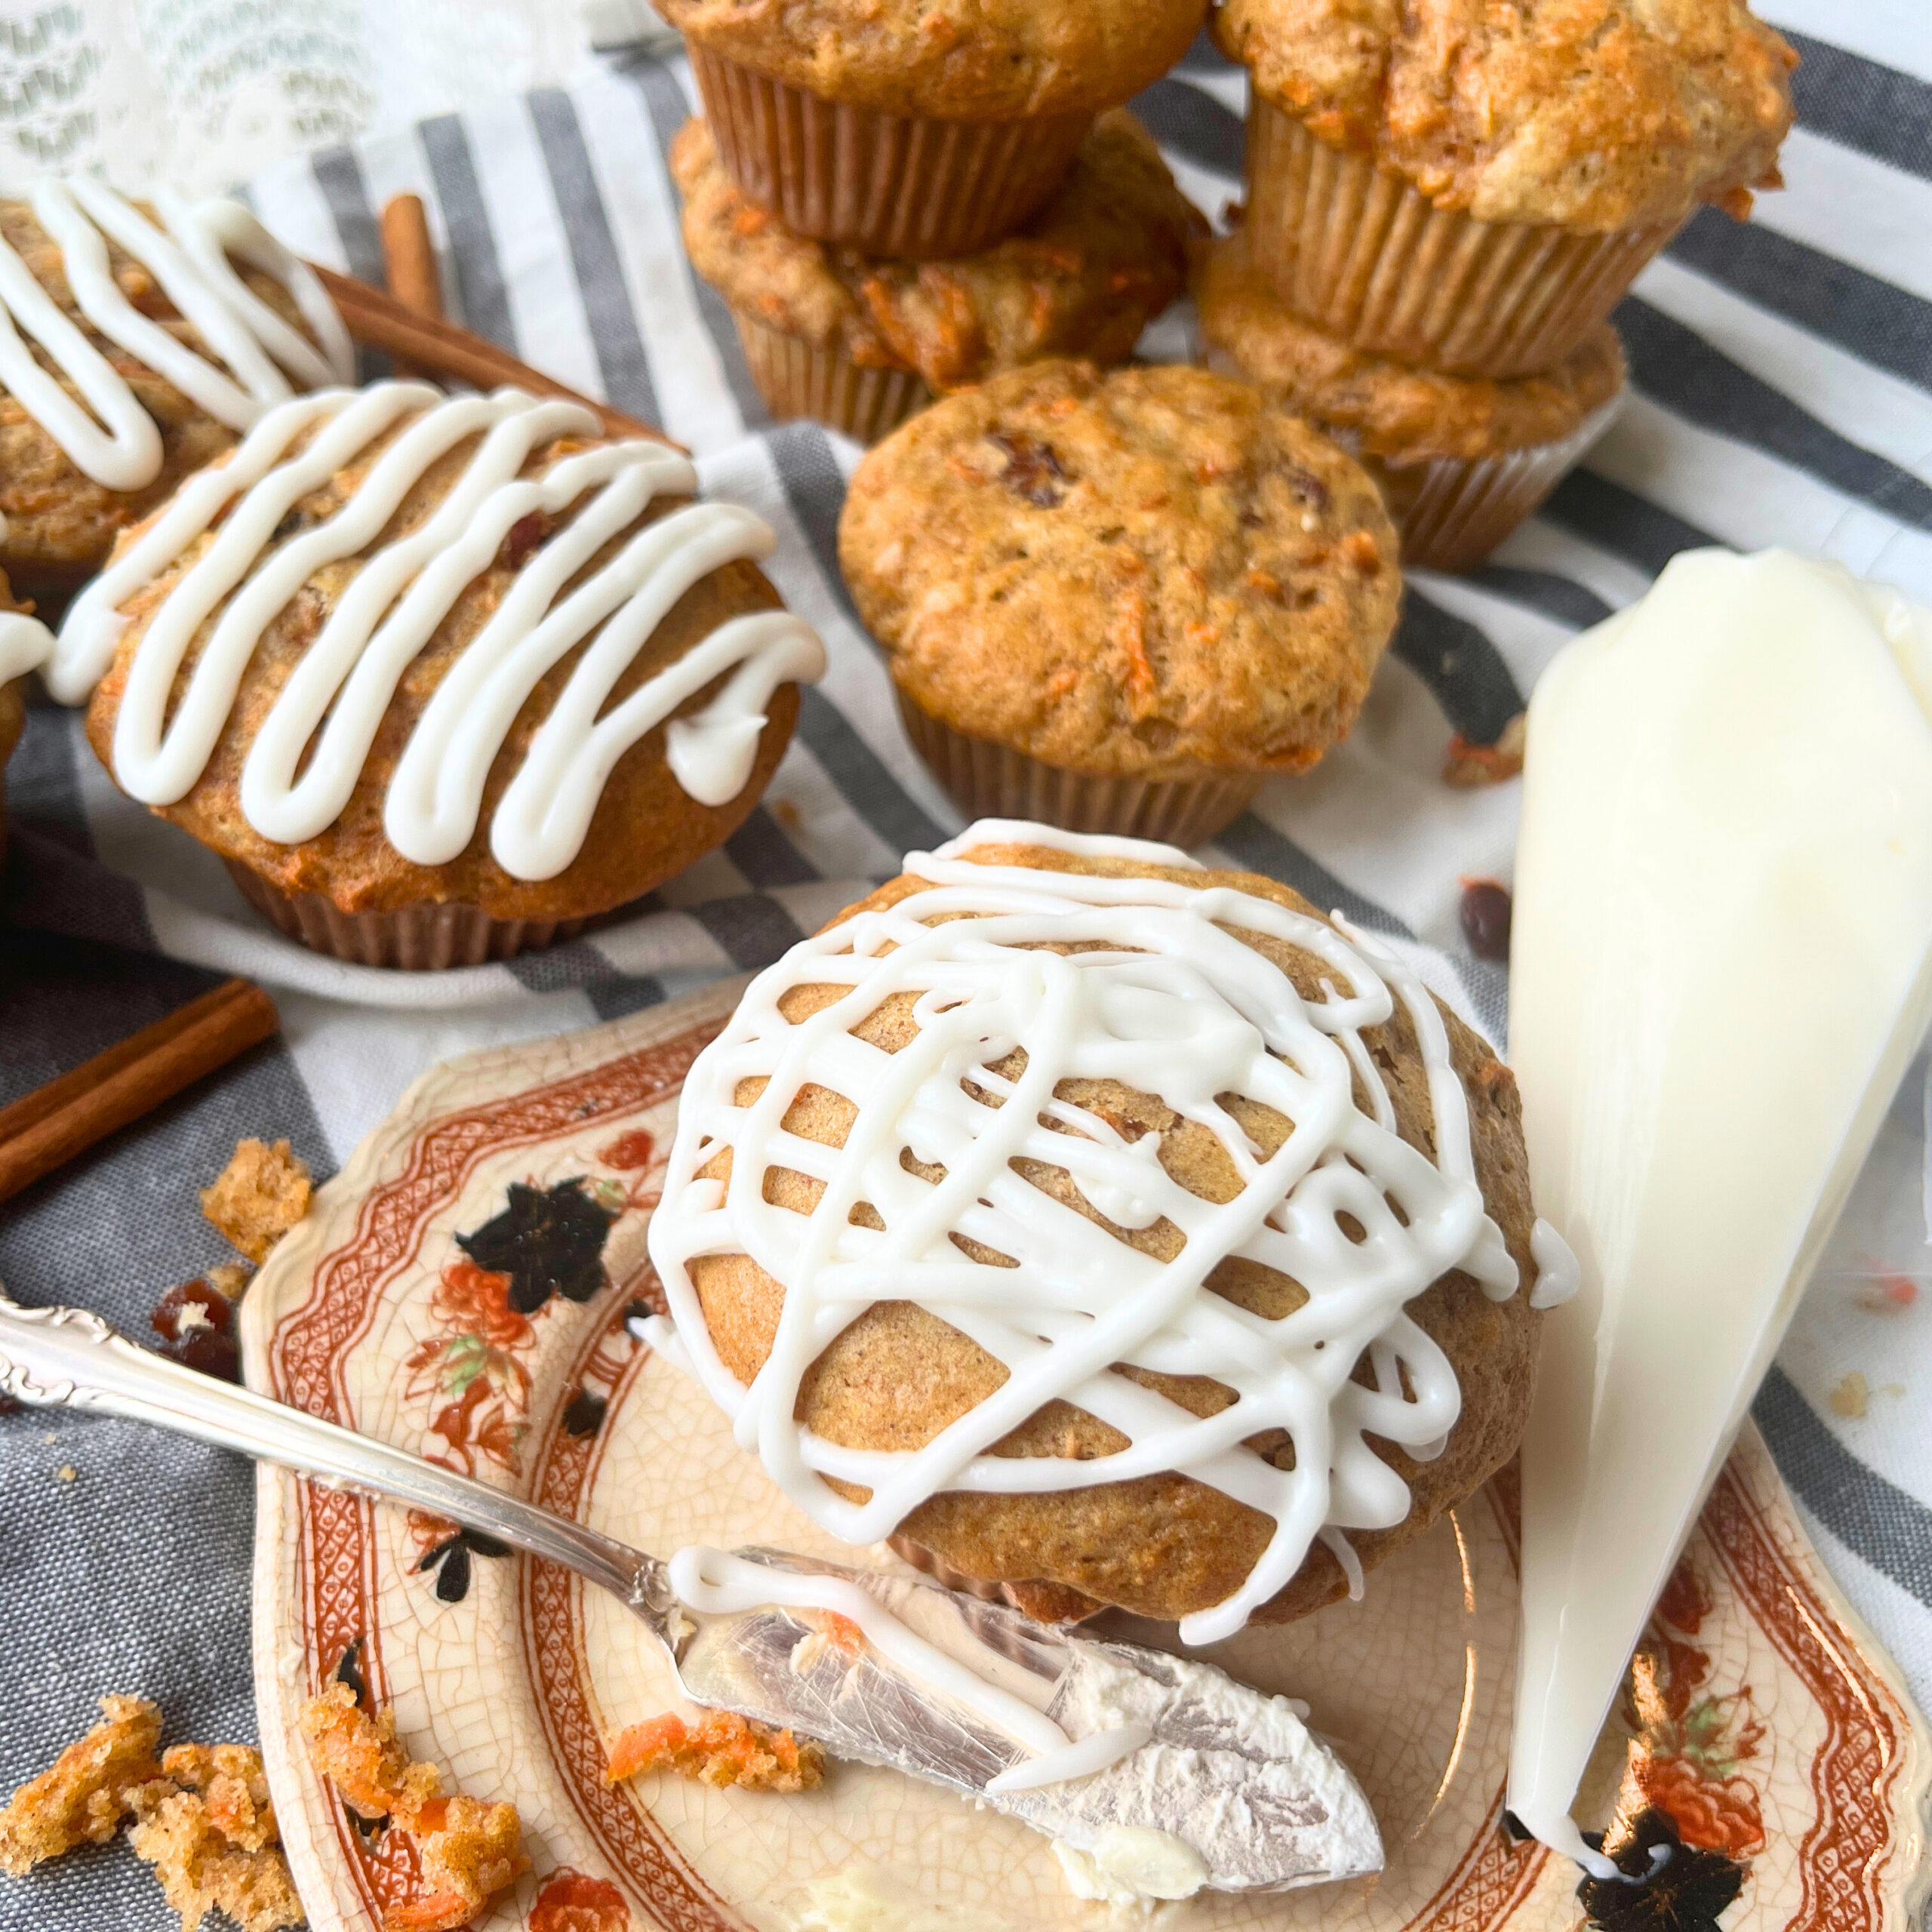 A table of muffins. Some have white icing on them and some have no icing. Once is sitting on a brown floral plate with a knife. There is a piping bag with icing off to the side.